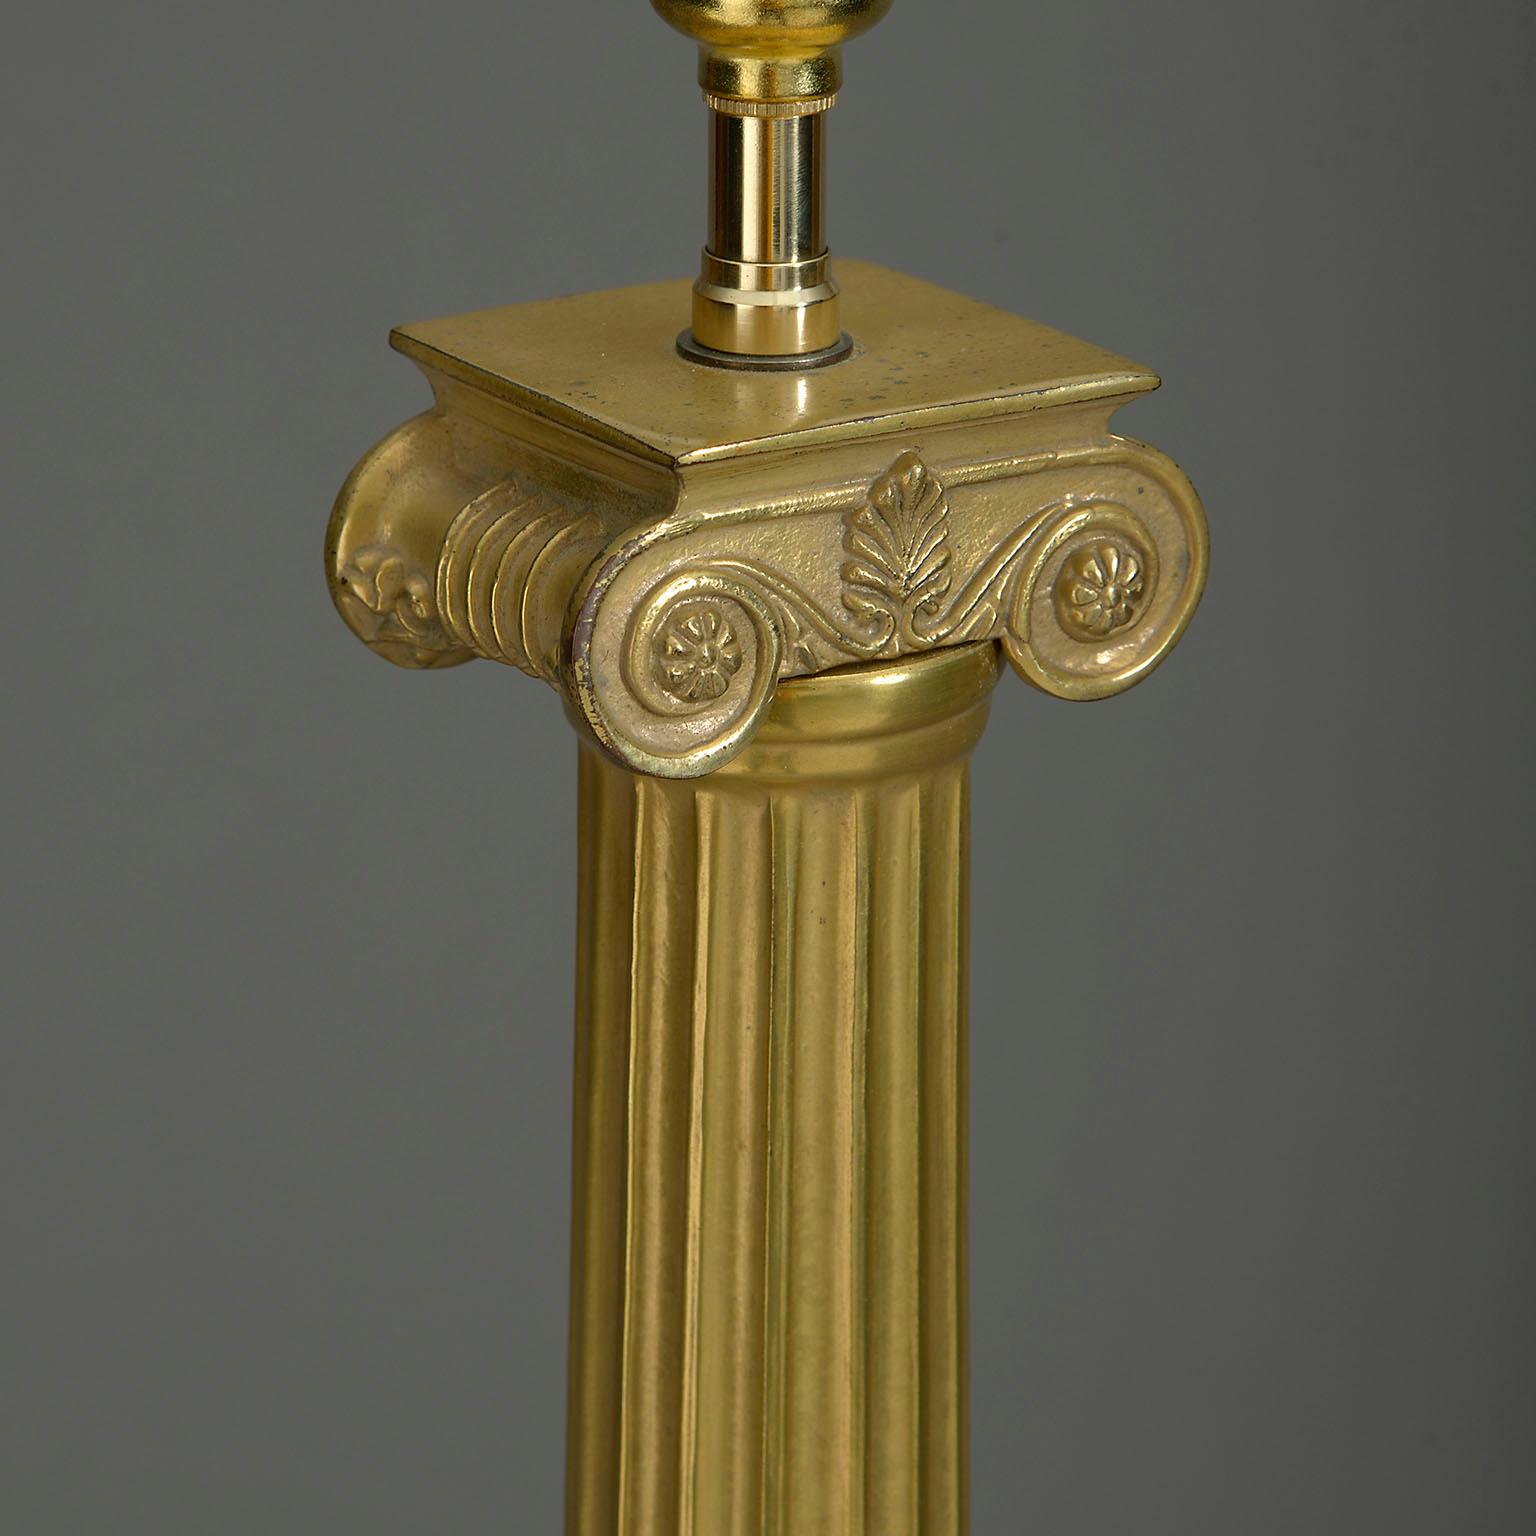 A twentieth century brass lamp base, taking the form of a fluted column with ionic capital, set upon a stepped square plinth.

Ex. U.S. Embassy London.

Dimensions refer to original brass elements only.

Wired to UK Standards. This lamp can be